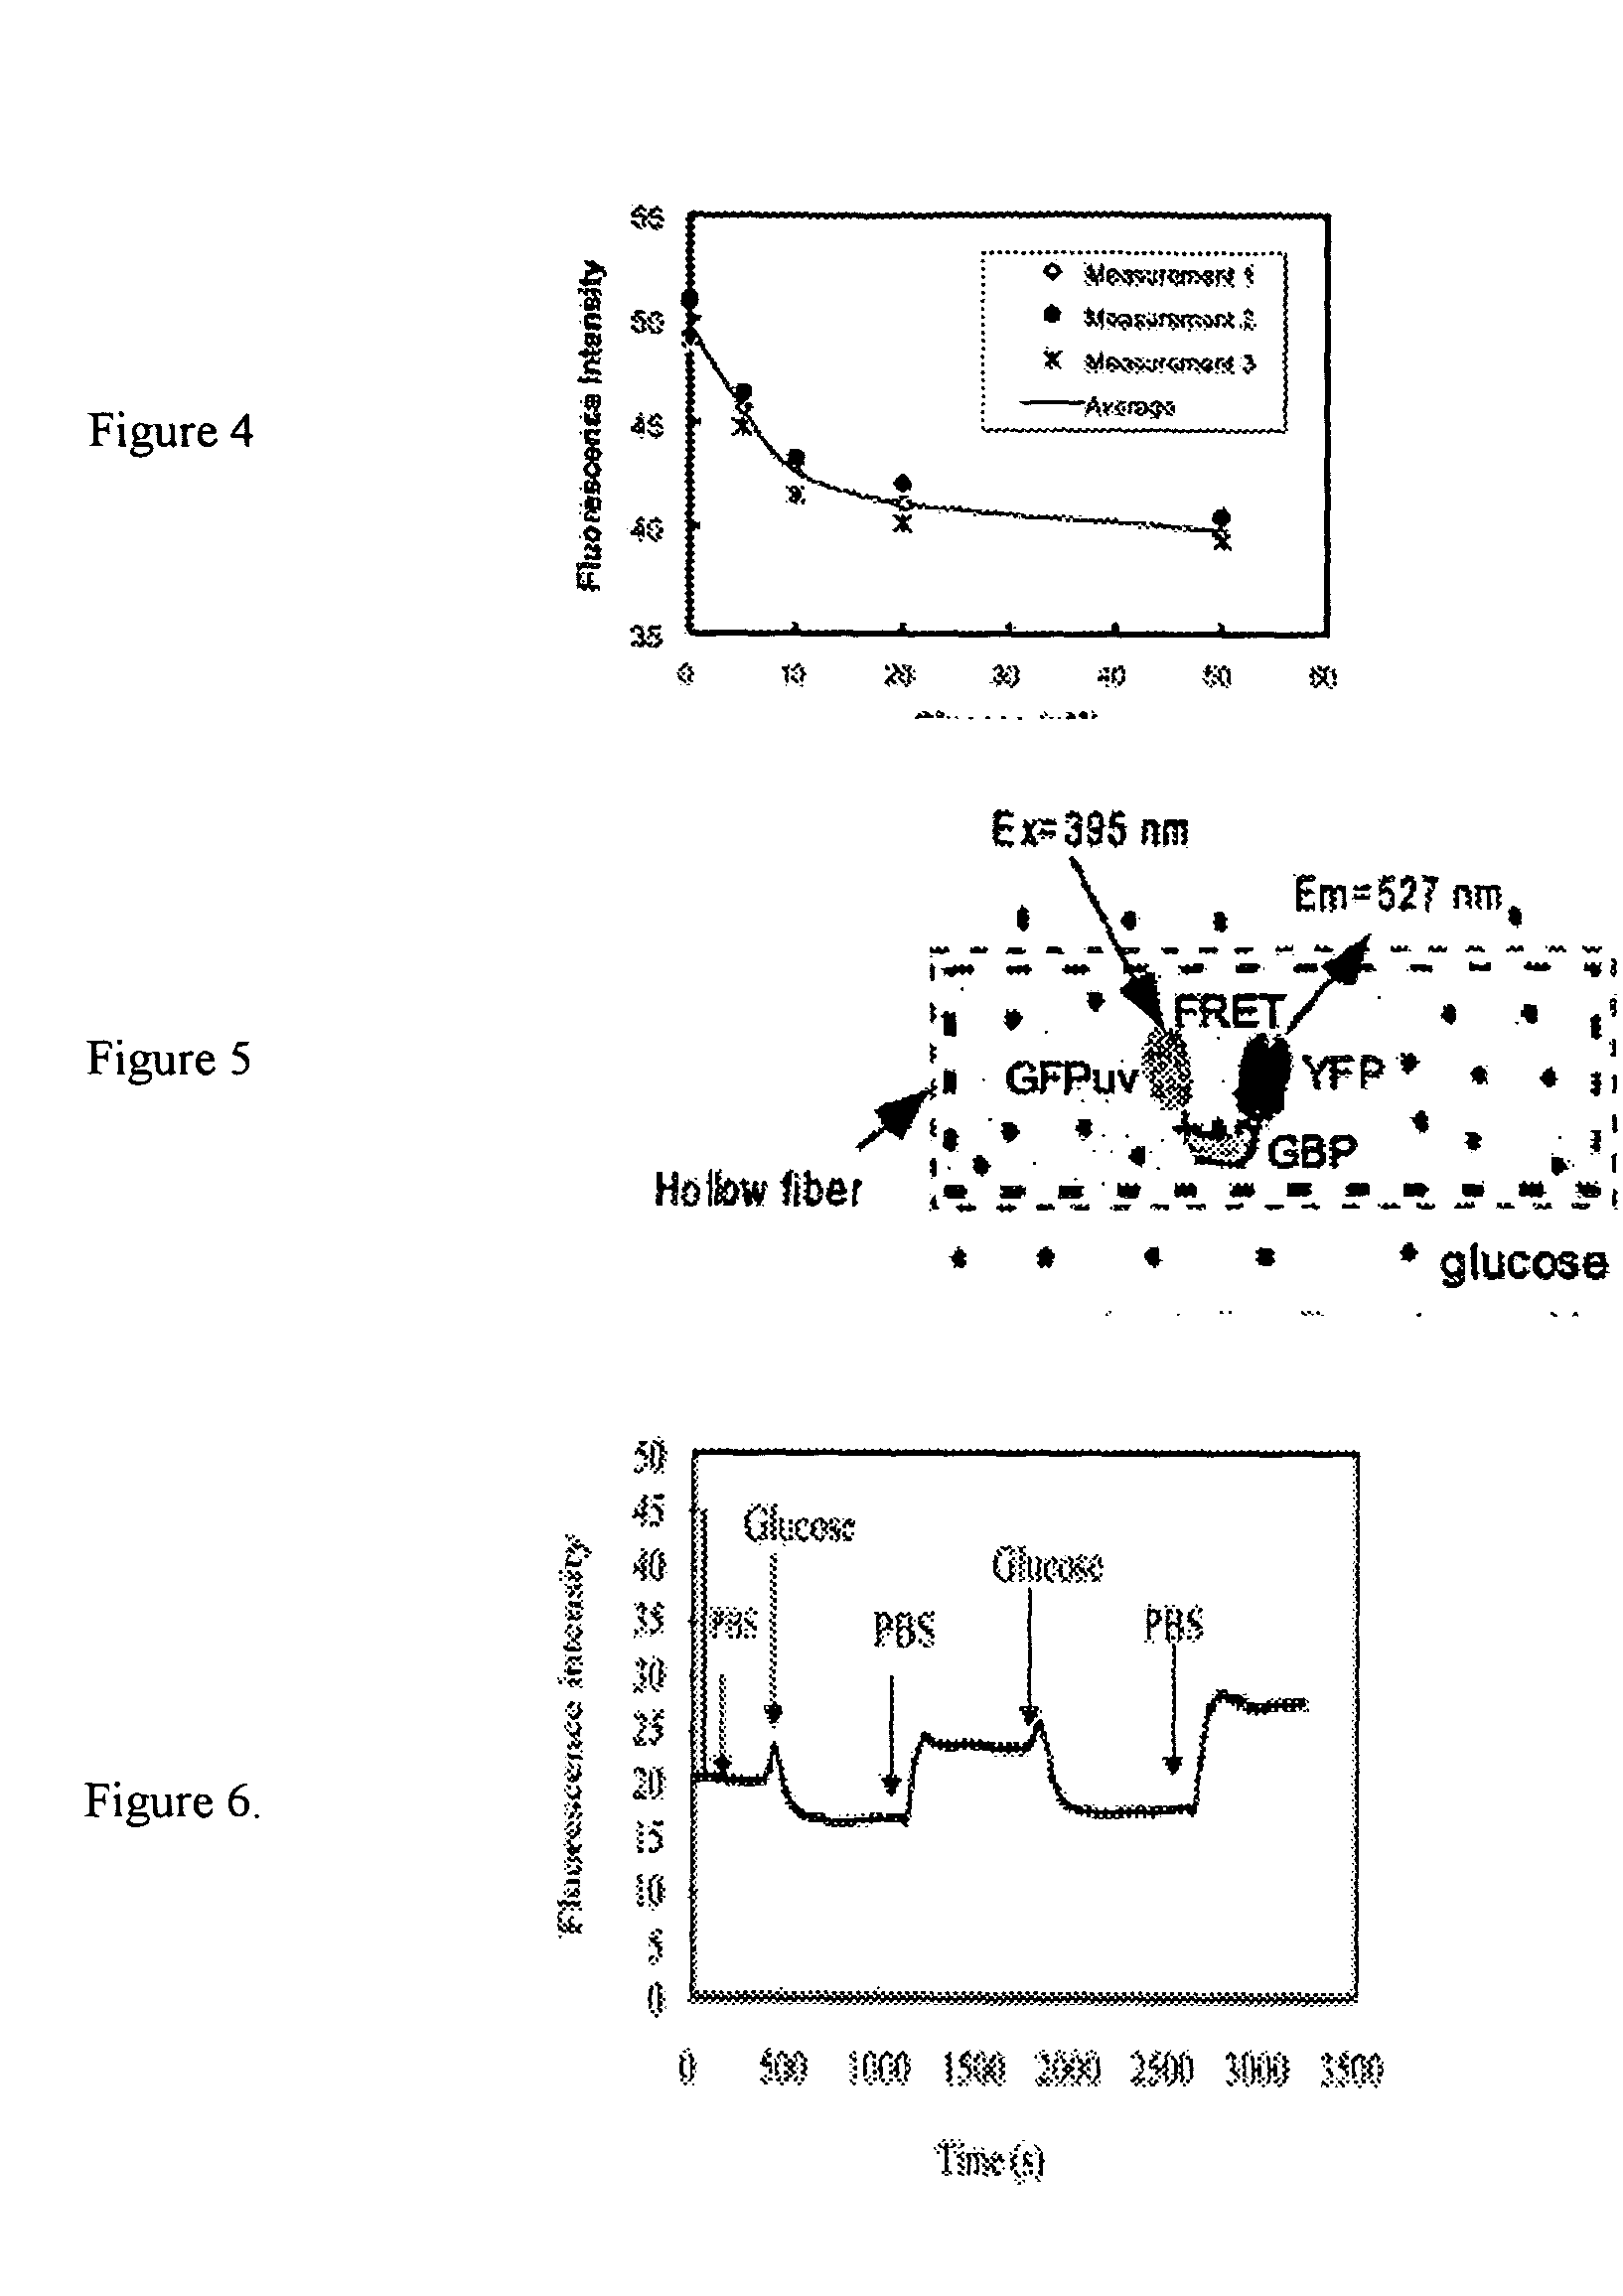 System and method for detecting bioanalytes and method for producing a bioanalyte sensor